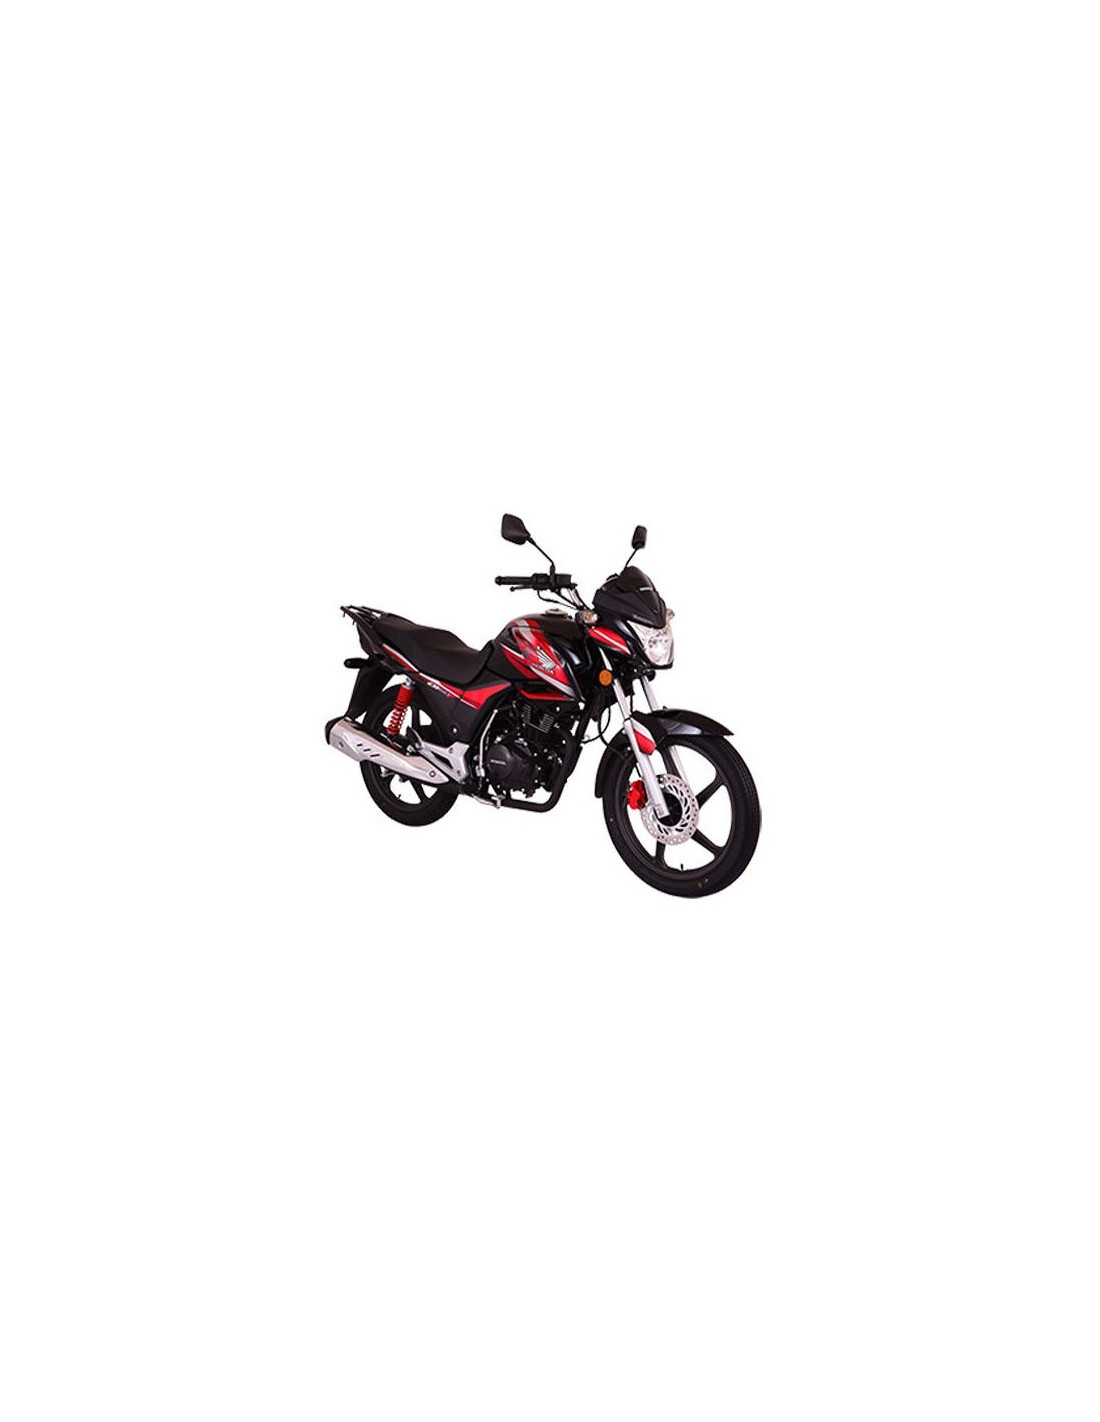 Honda Cb 150f Price In Pakistan Specs Rating Reviews And Pictures